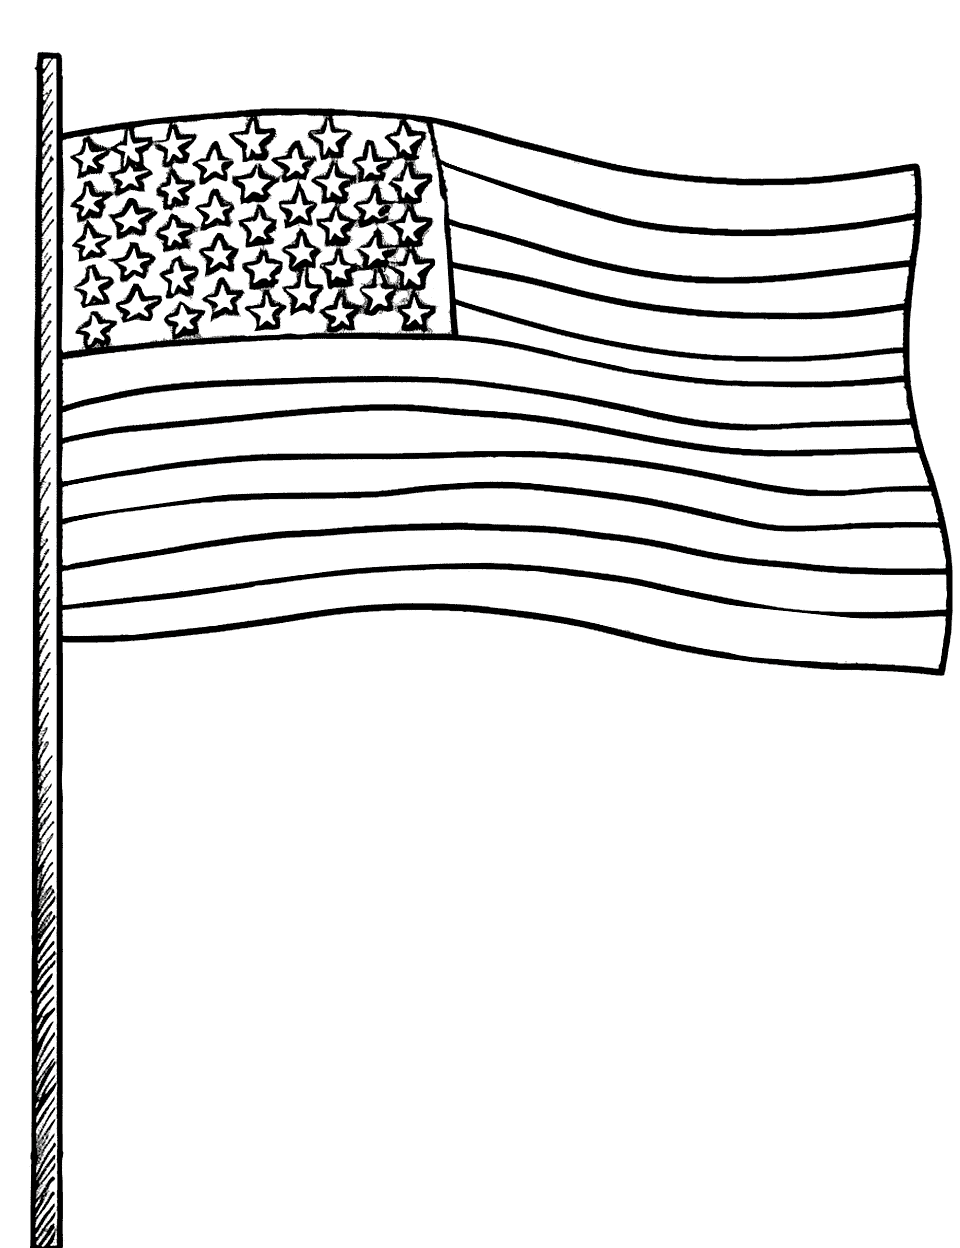 United States Flag Drawing American Coloring Page - A coloring page featuring a detailed drawing of the United States flag.